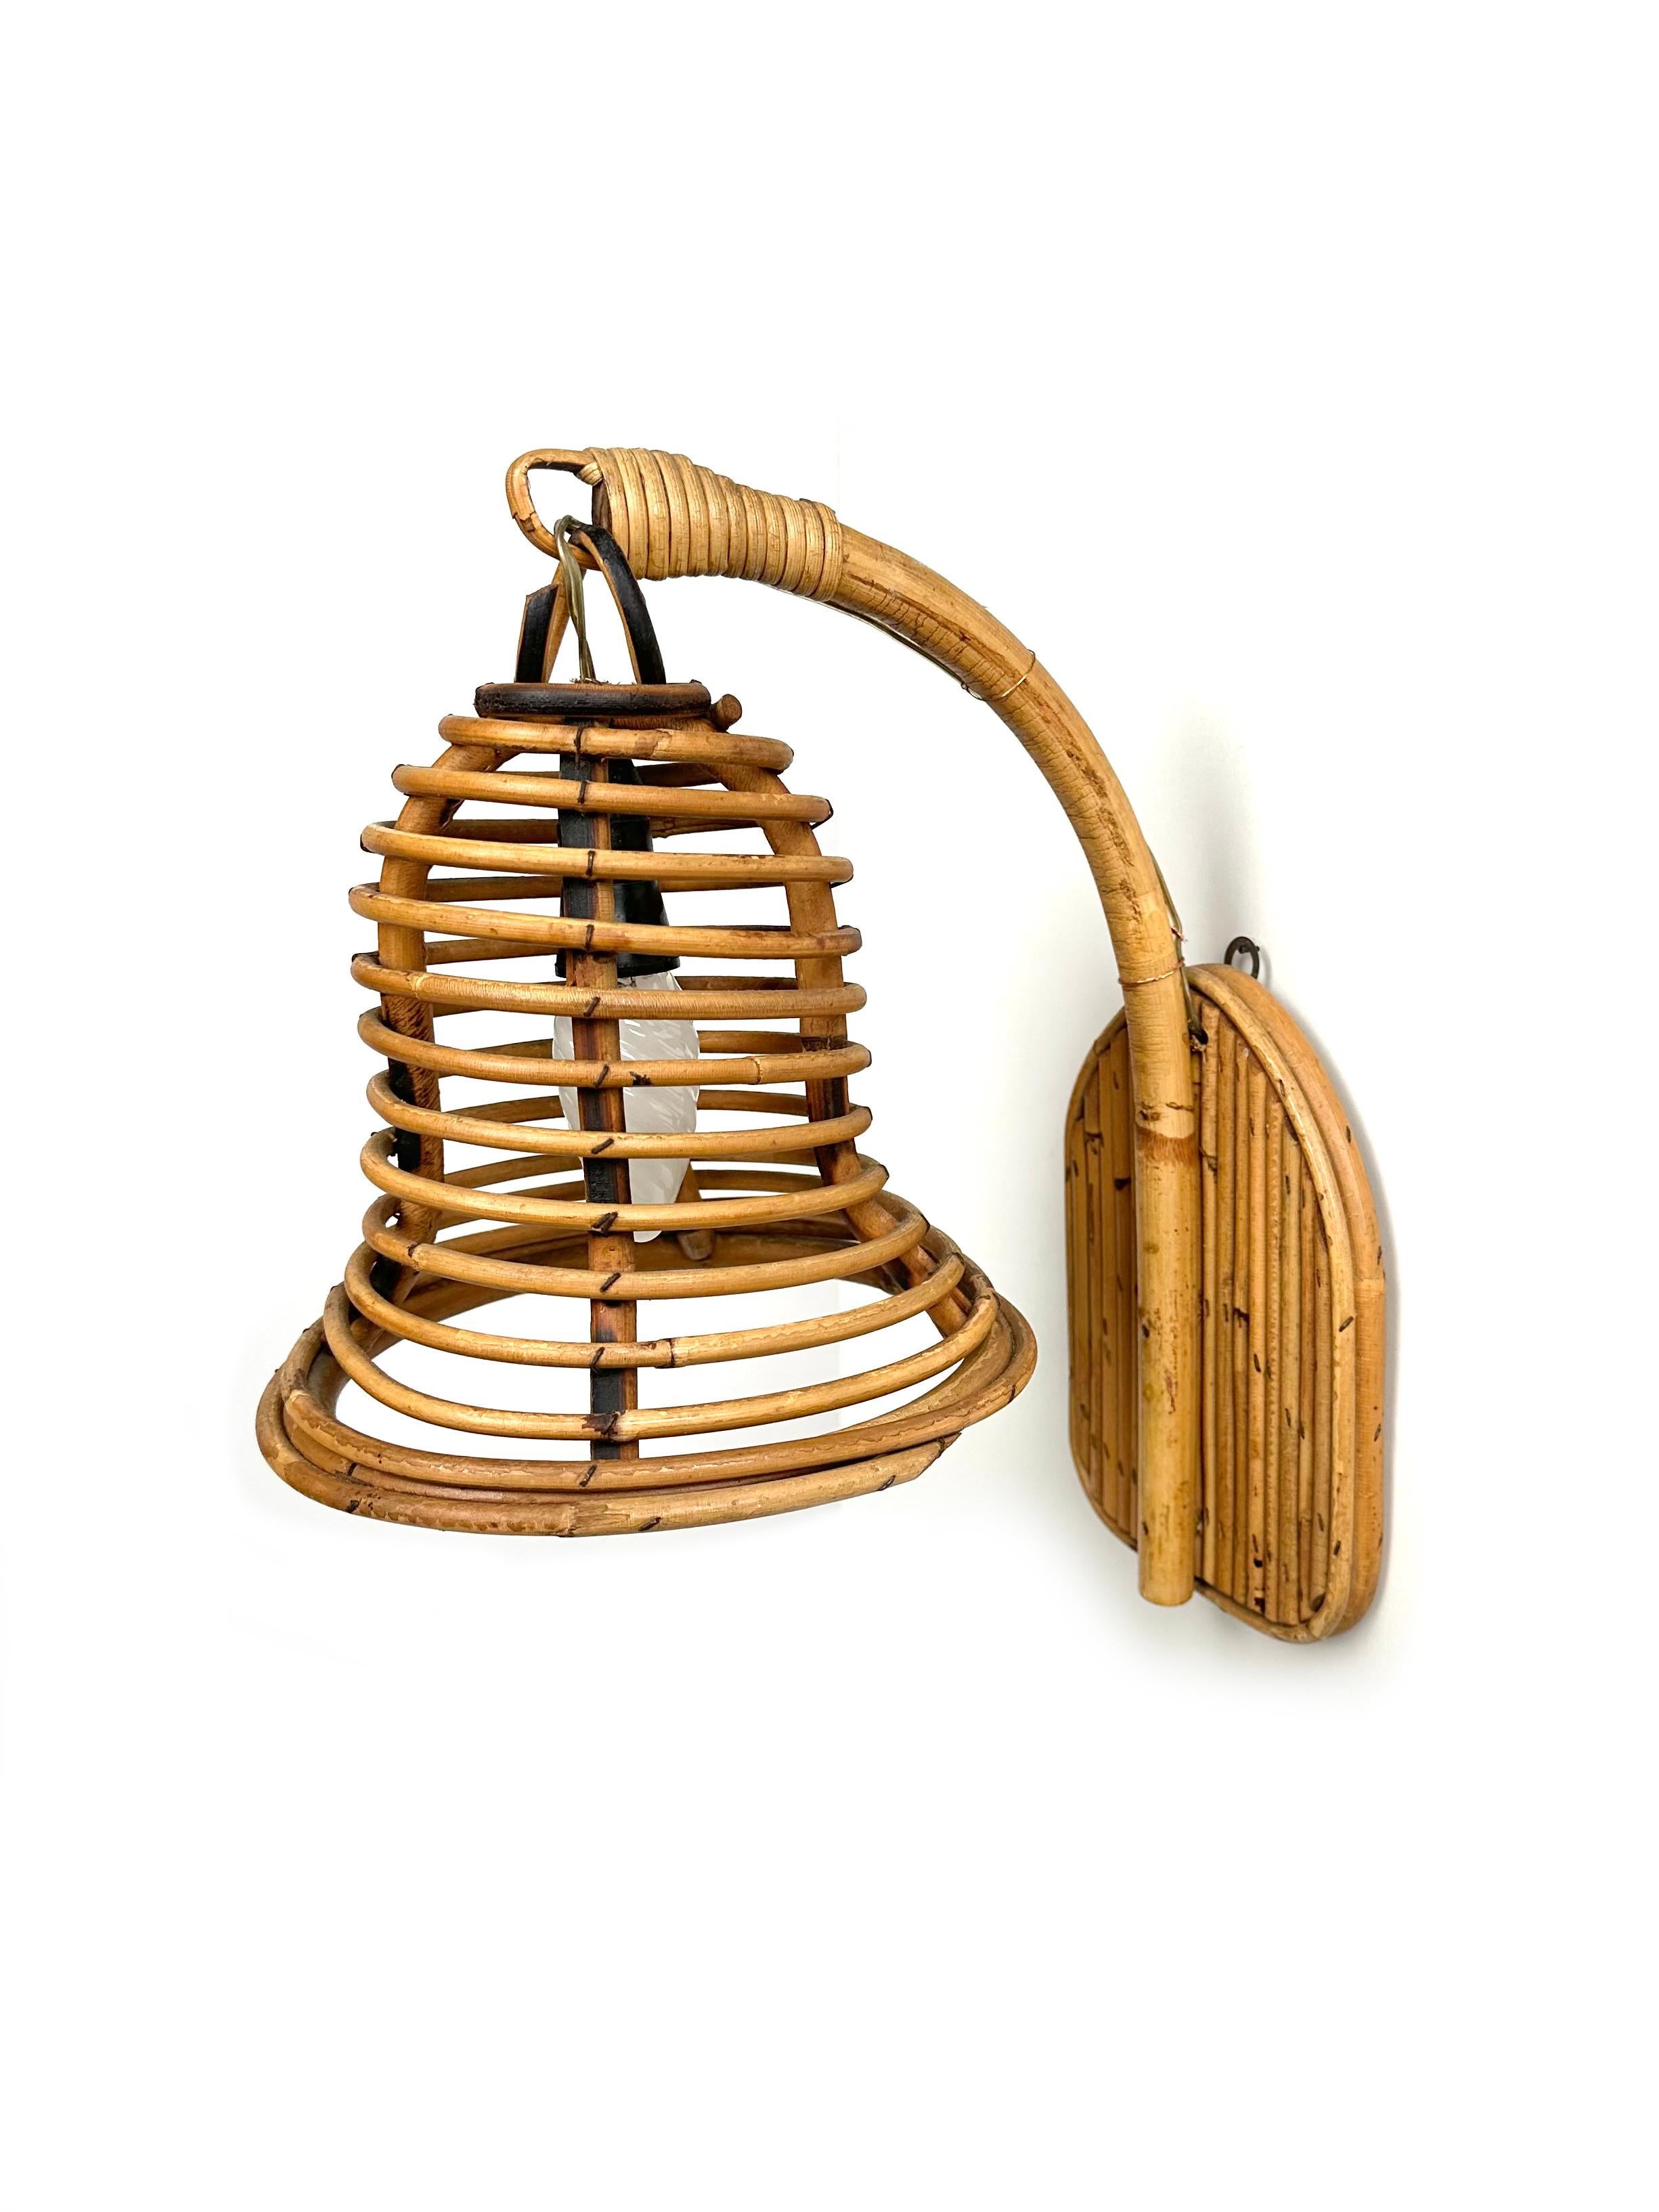 Rattan & Bamboo Sconce Wall Lamp Lantern Louis Sognot Style, Italy, 1960s For Sale 1